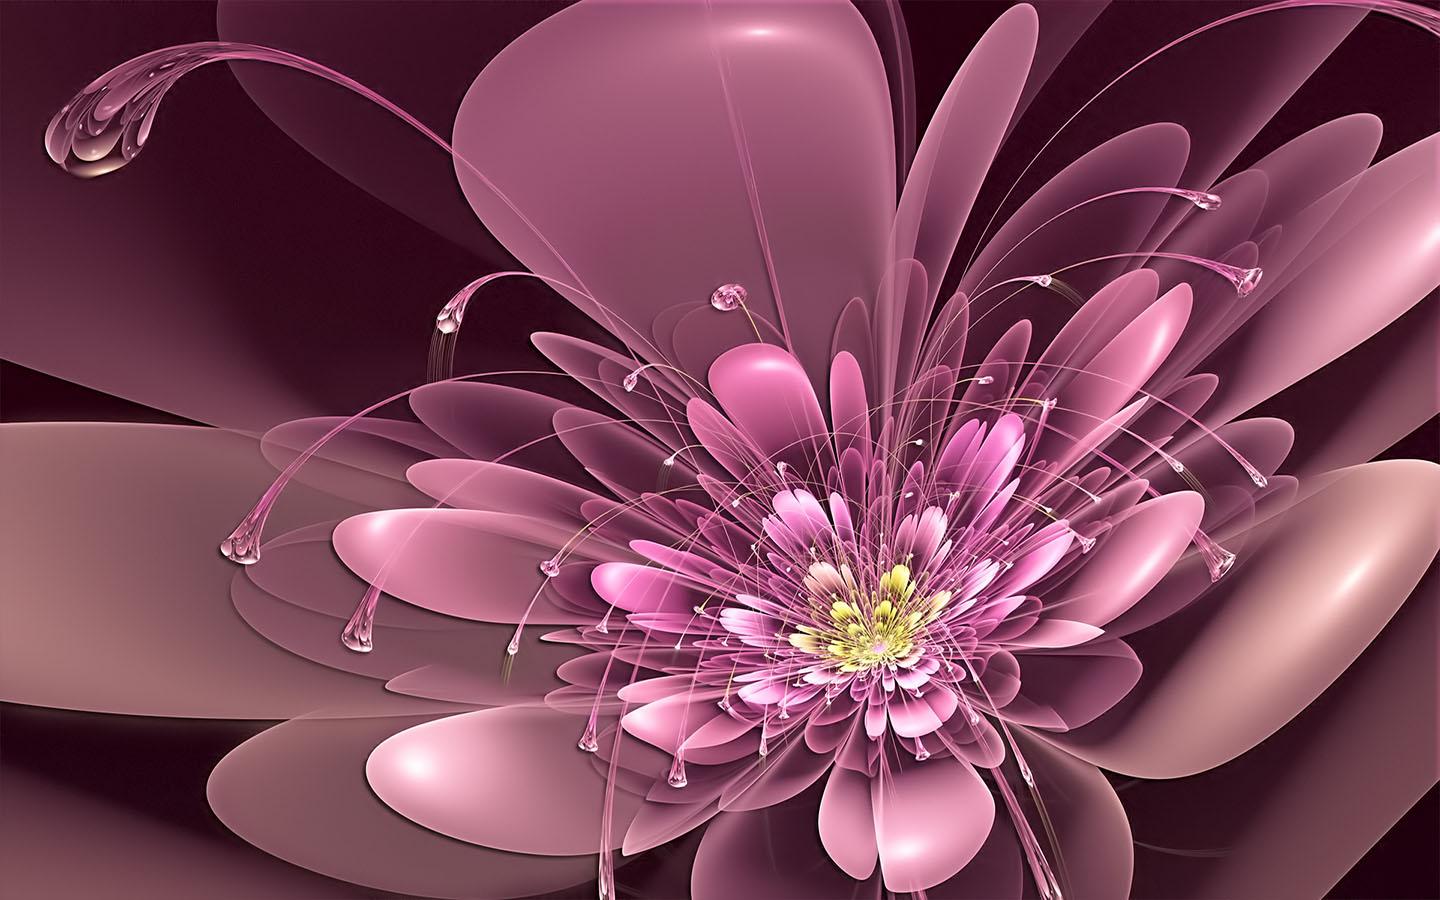 Glowing Flowers Wallpaper - Android Apps on Google Play